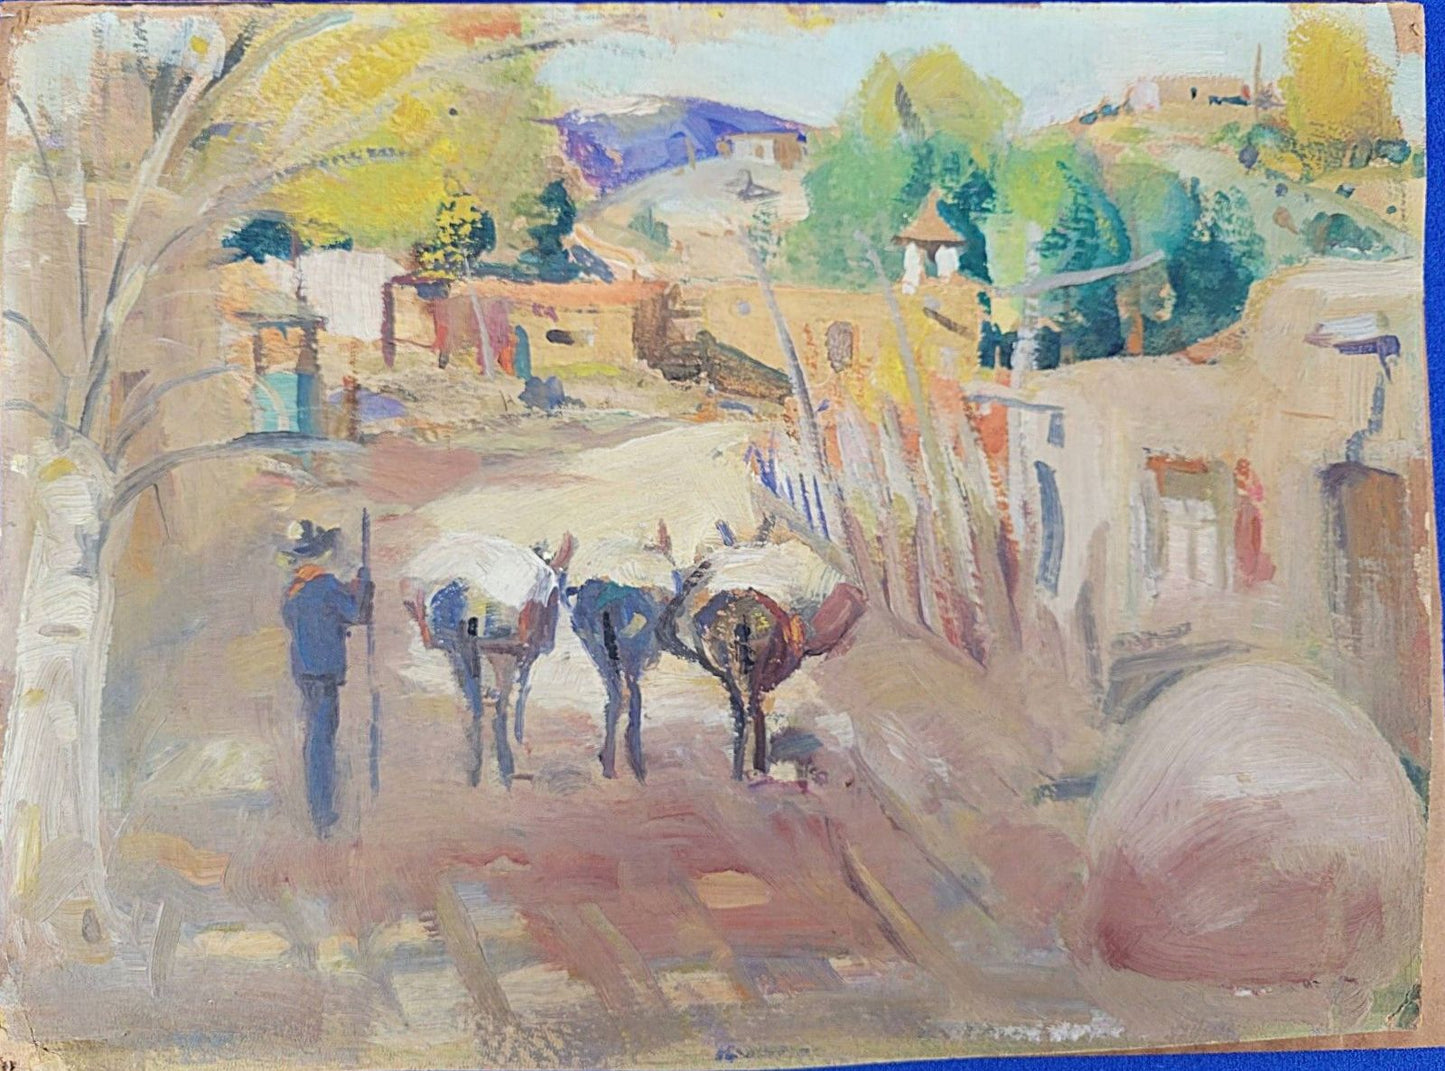 LaVerne Nelson Black - Saddled Burro's Coming Home to the Pueblo 9" x 12"